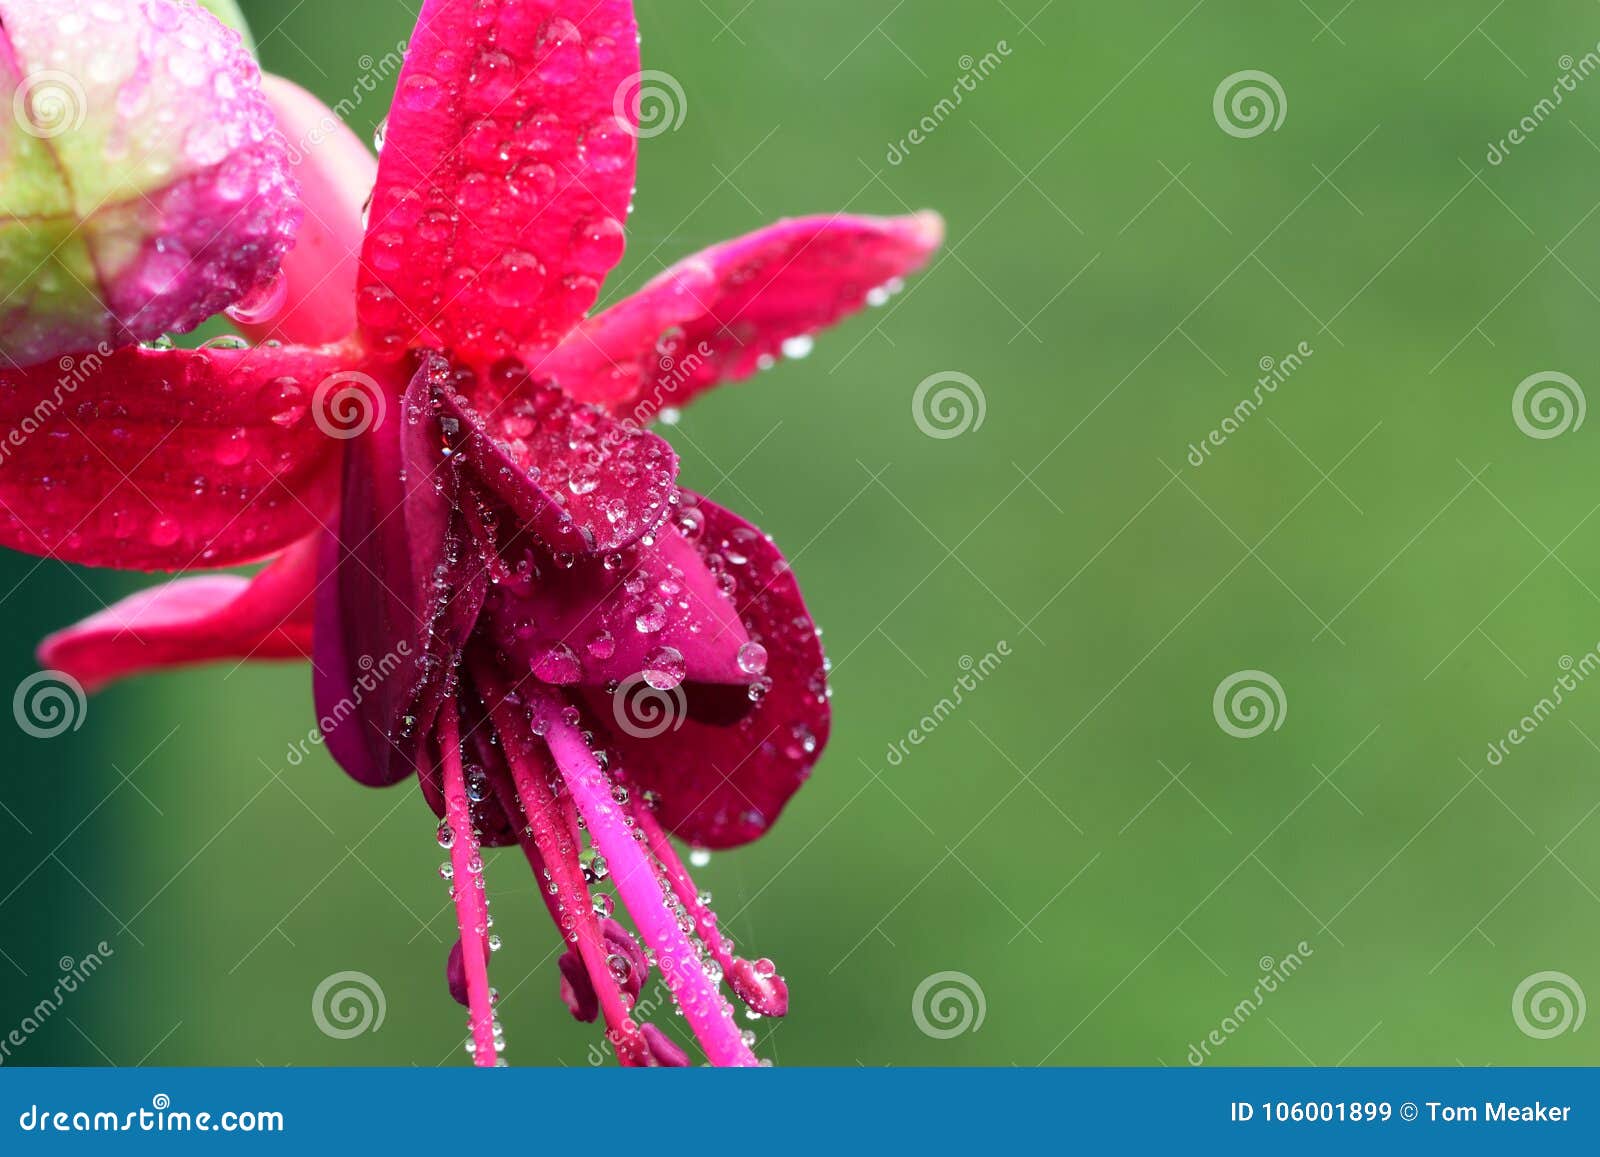 Pink Fuchsia Flower in Bloom Stock Image - Image of outdoor, drops ...